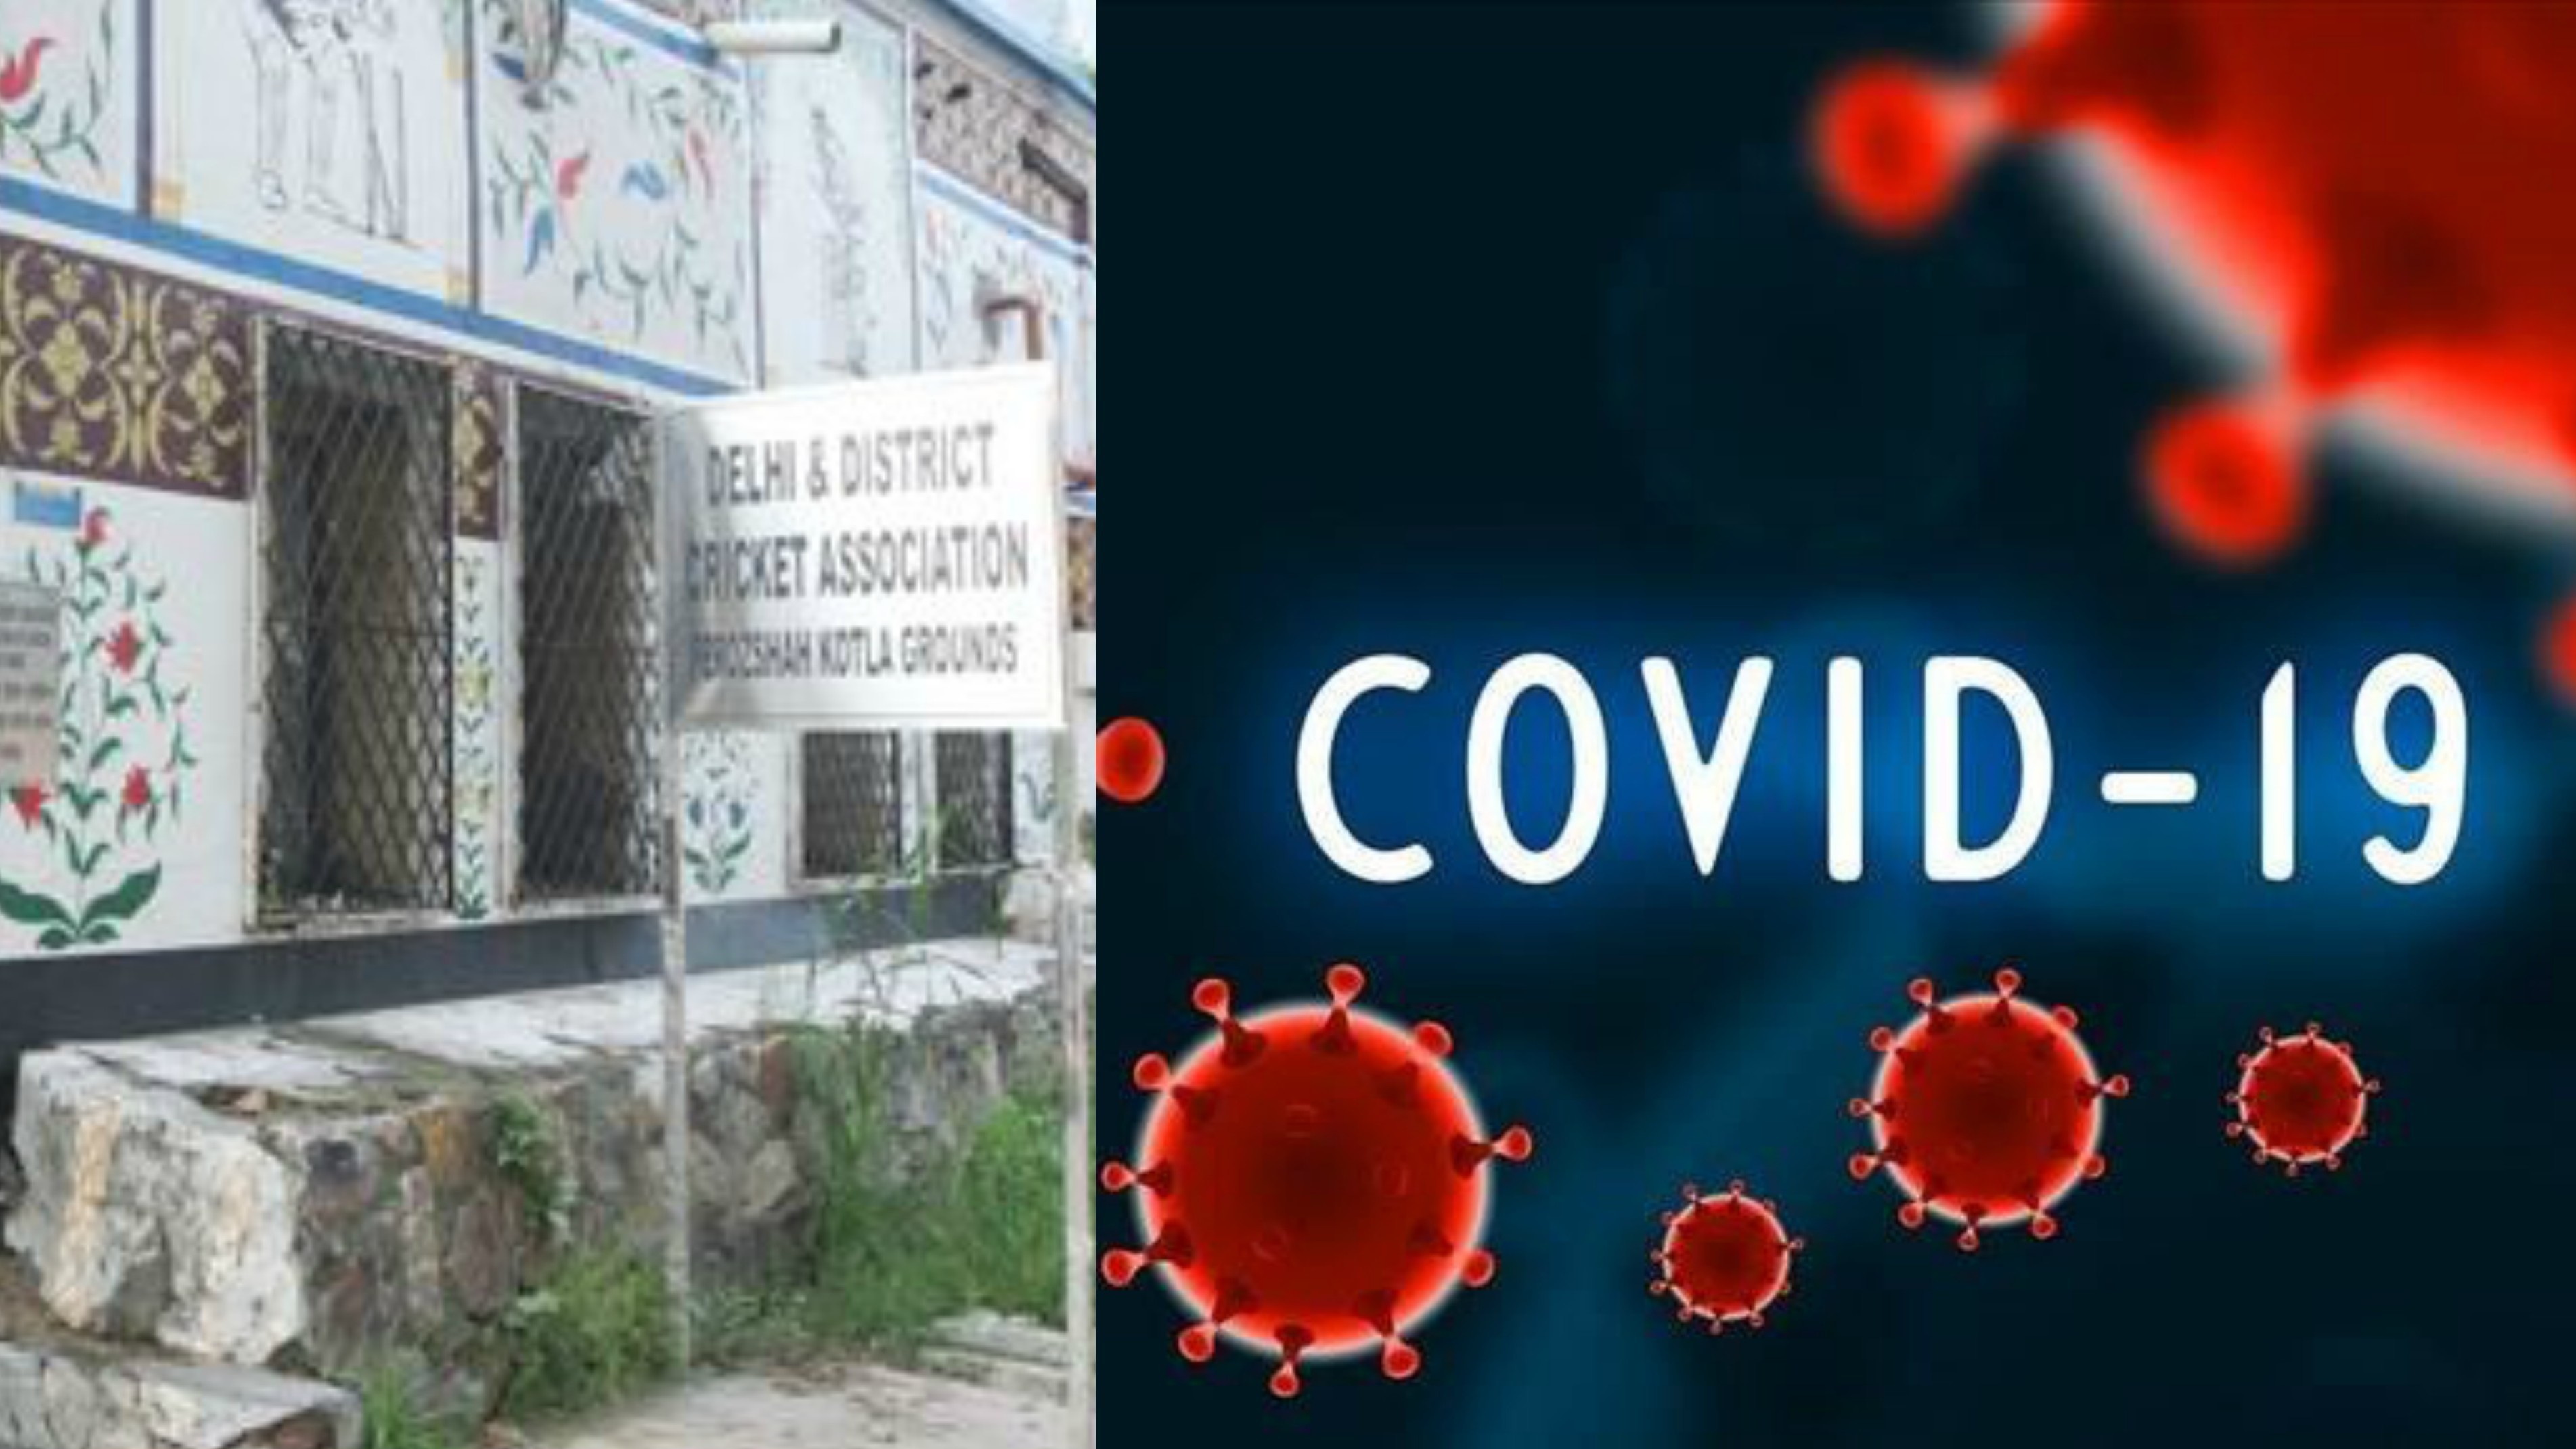 DDCA office shut after one employee tests positive for COVID-19